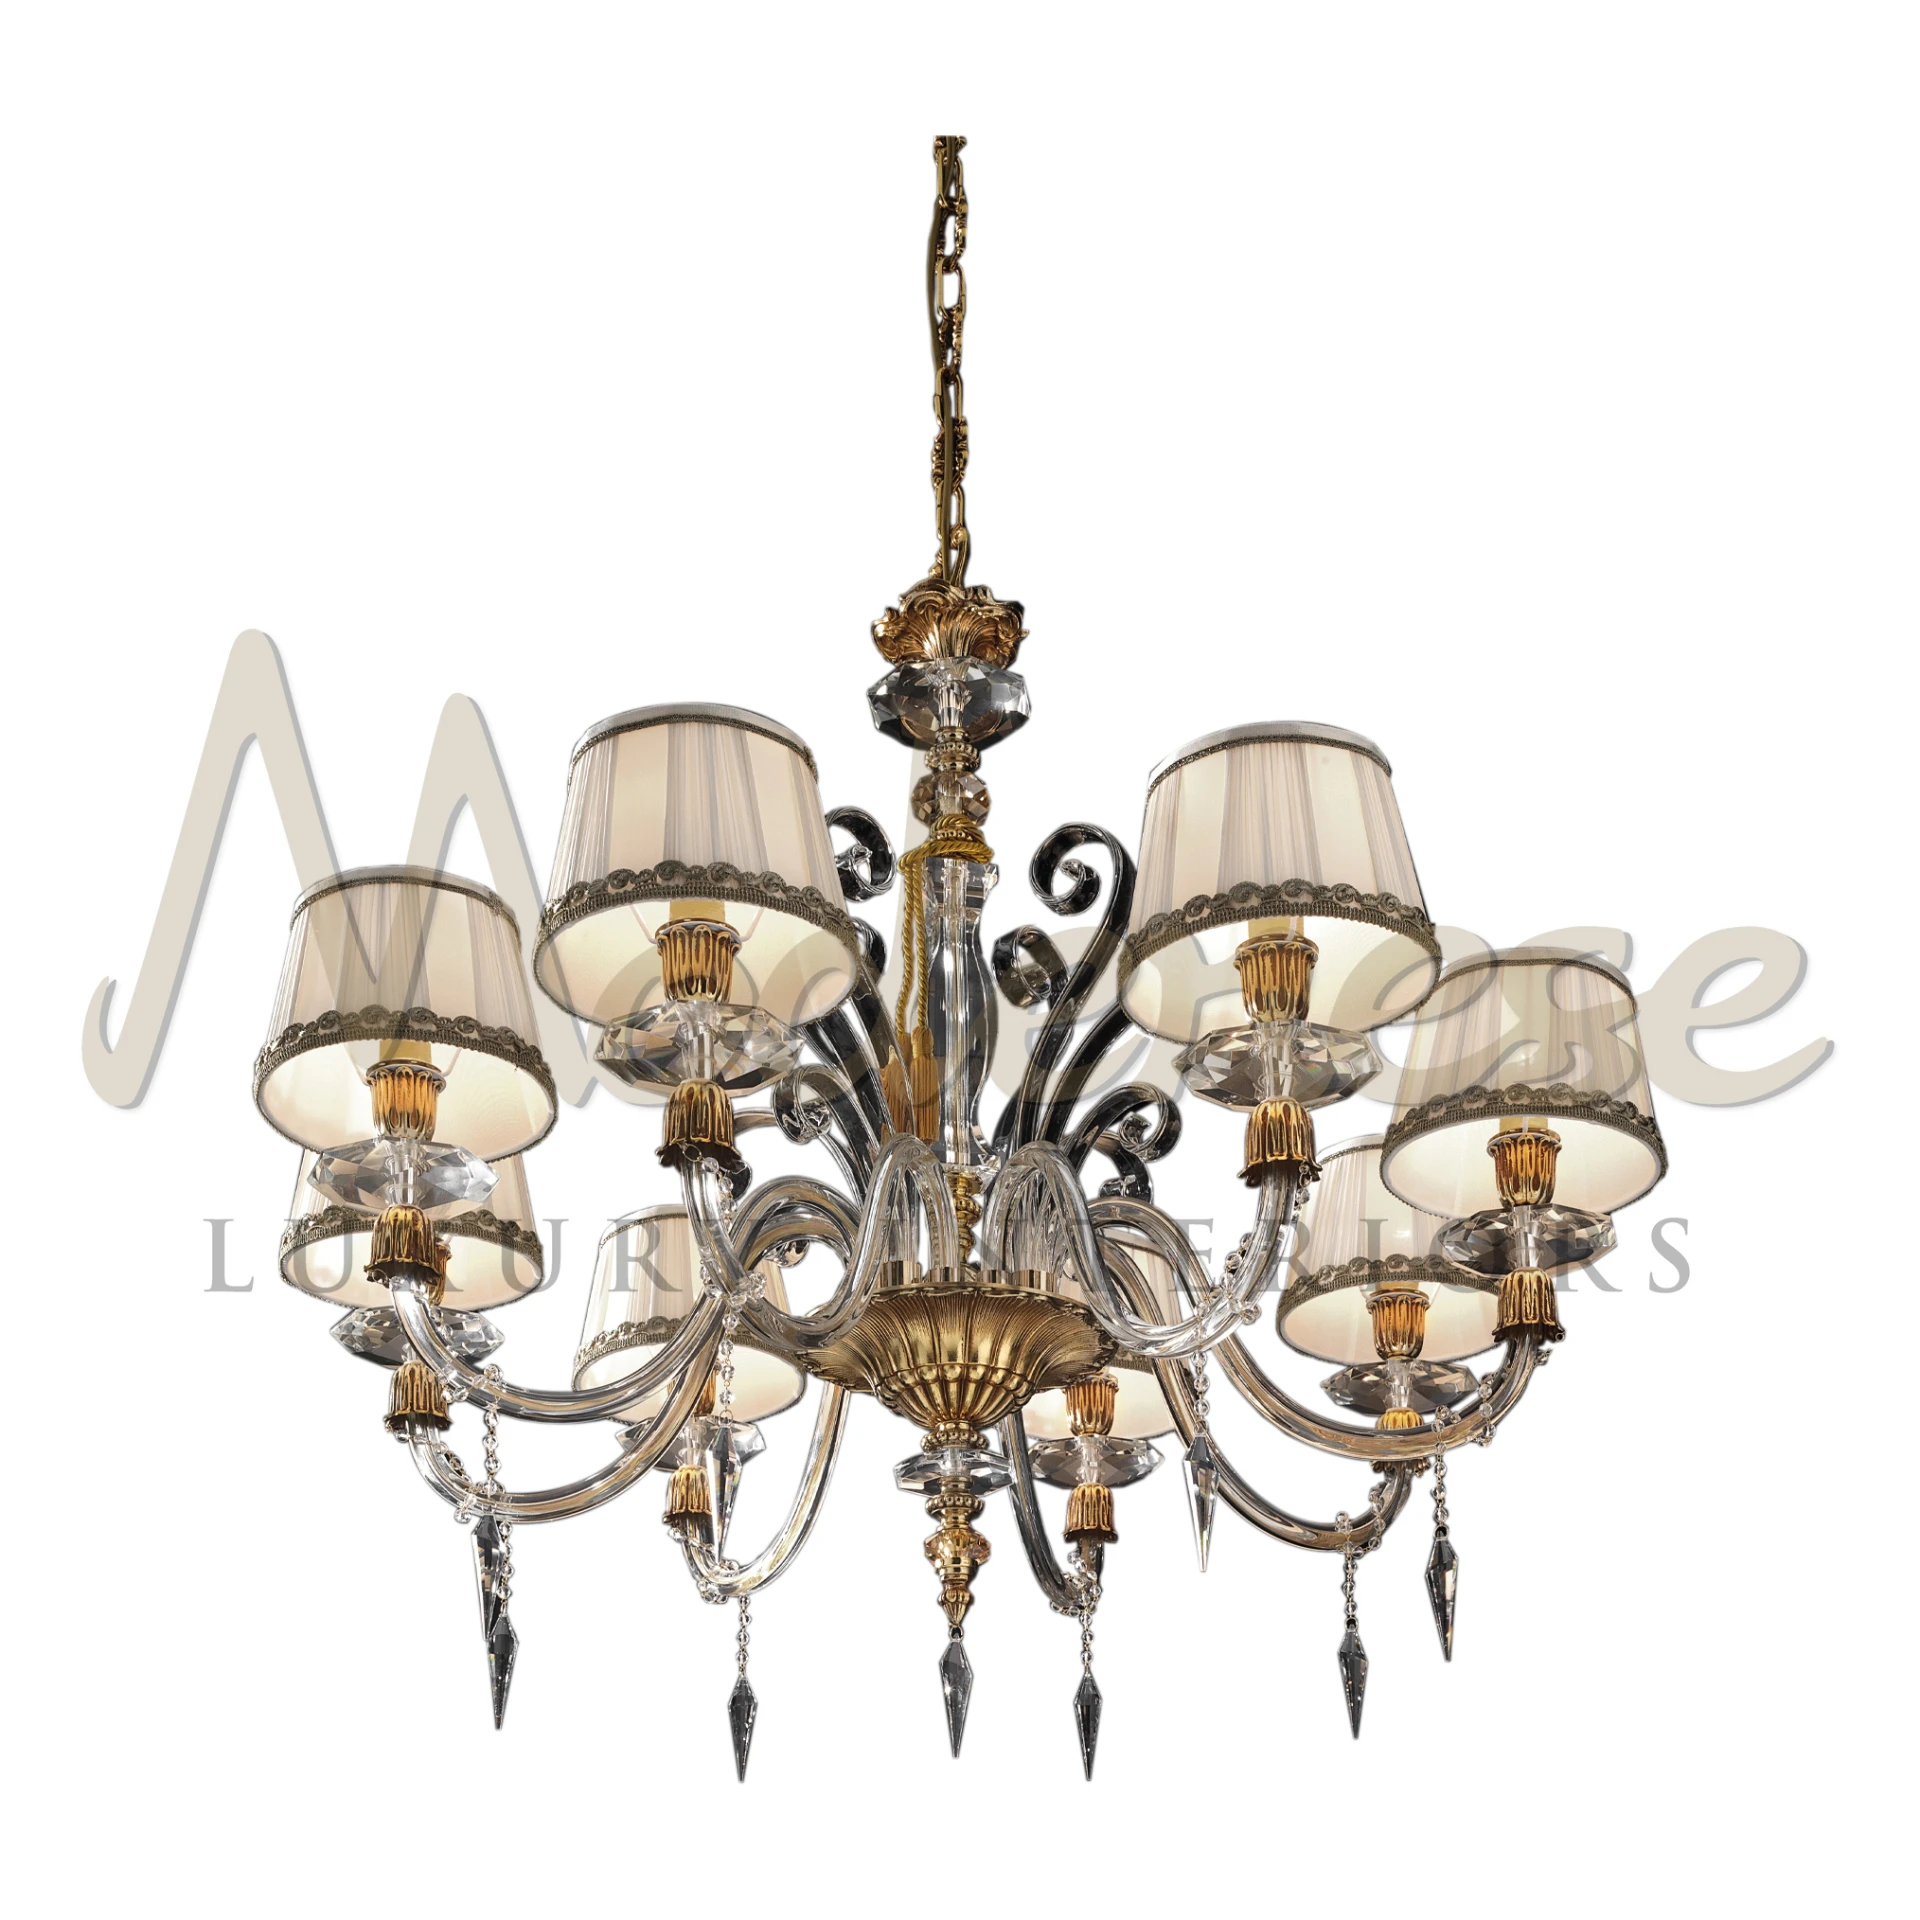 Luxurious 'Classic Couture Chandelier' from Modenese, featuring intricate gold accents and shaded lights.